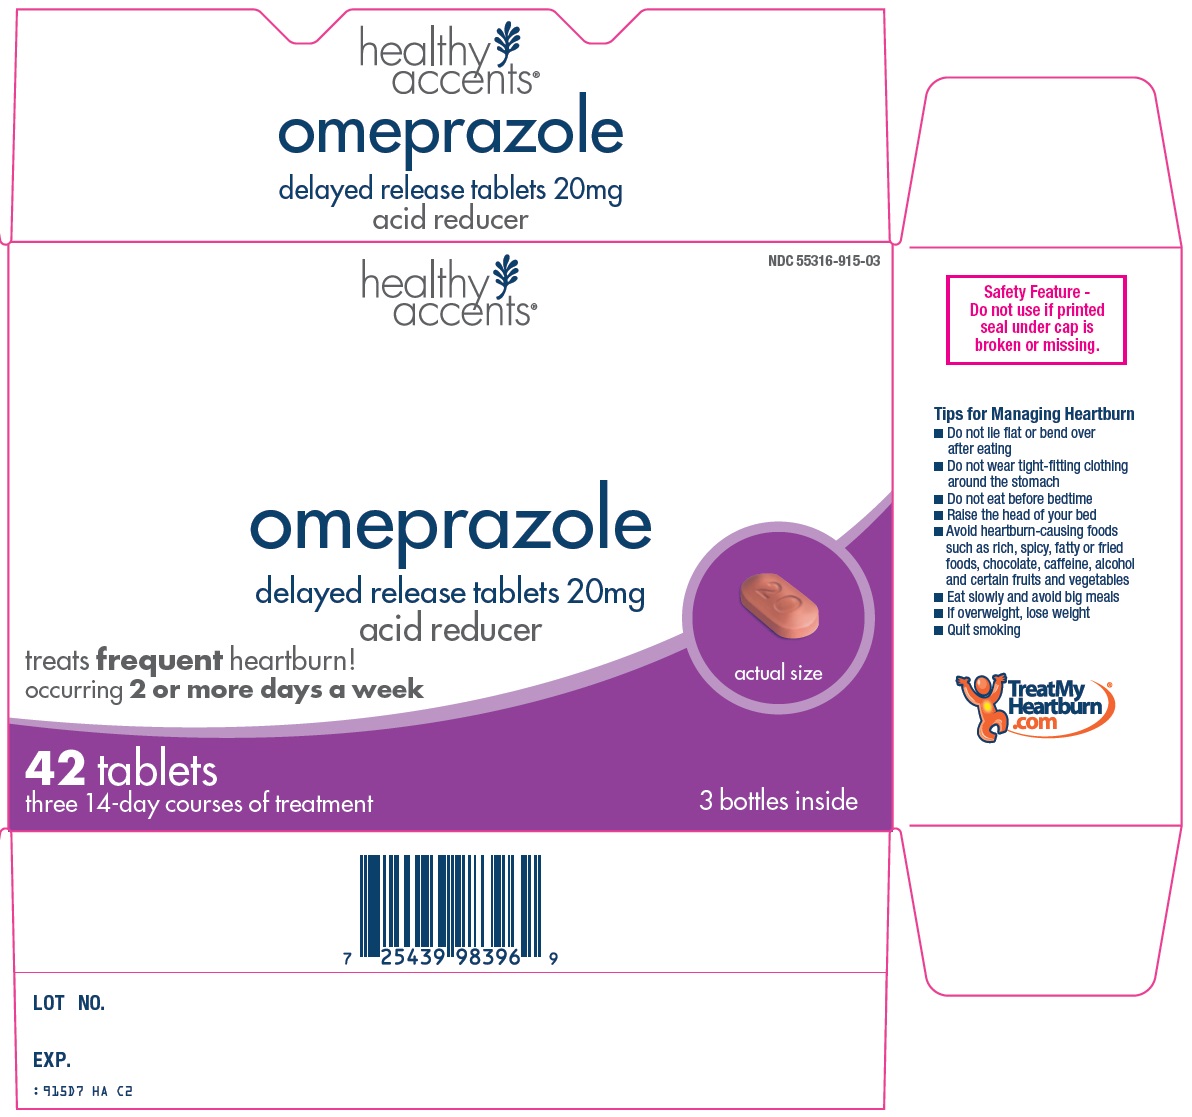 Healthy Accents Omeprazole Image 1